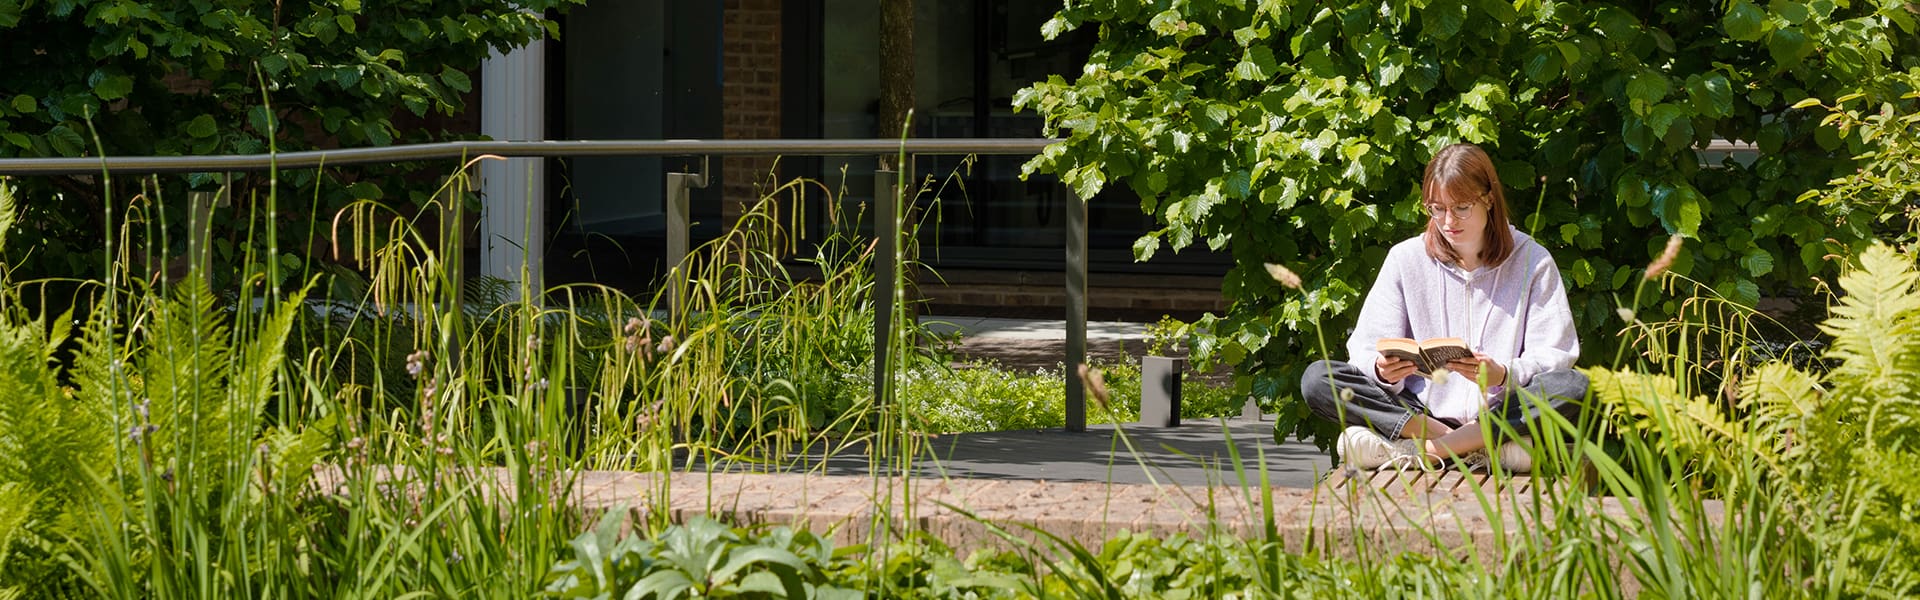 A student sits reading, surrounded by greenery